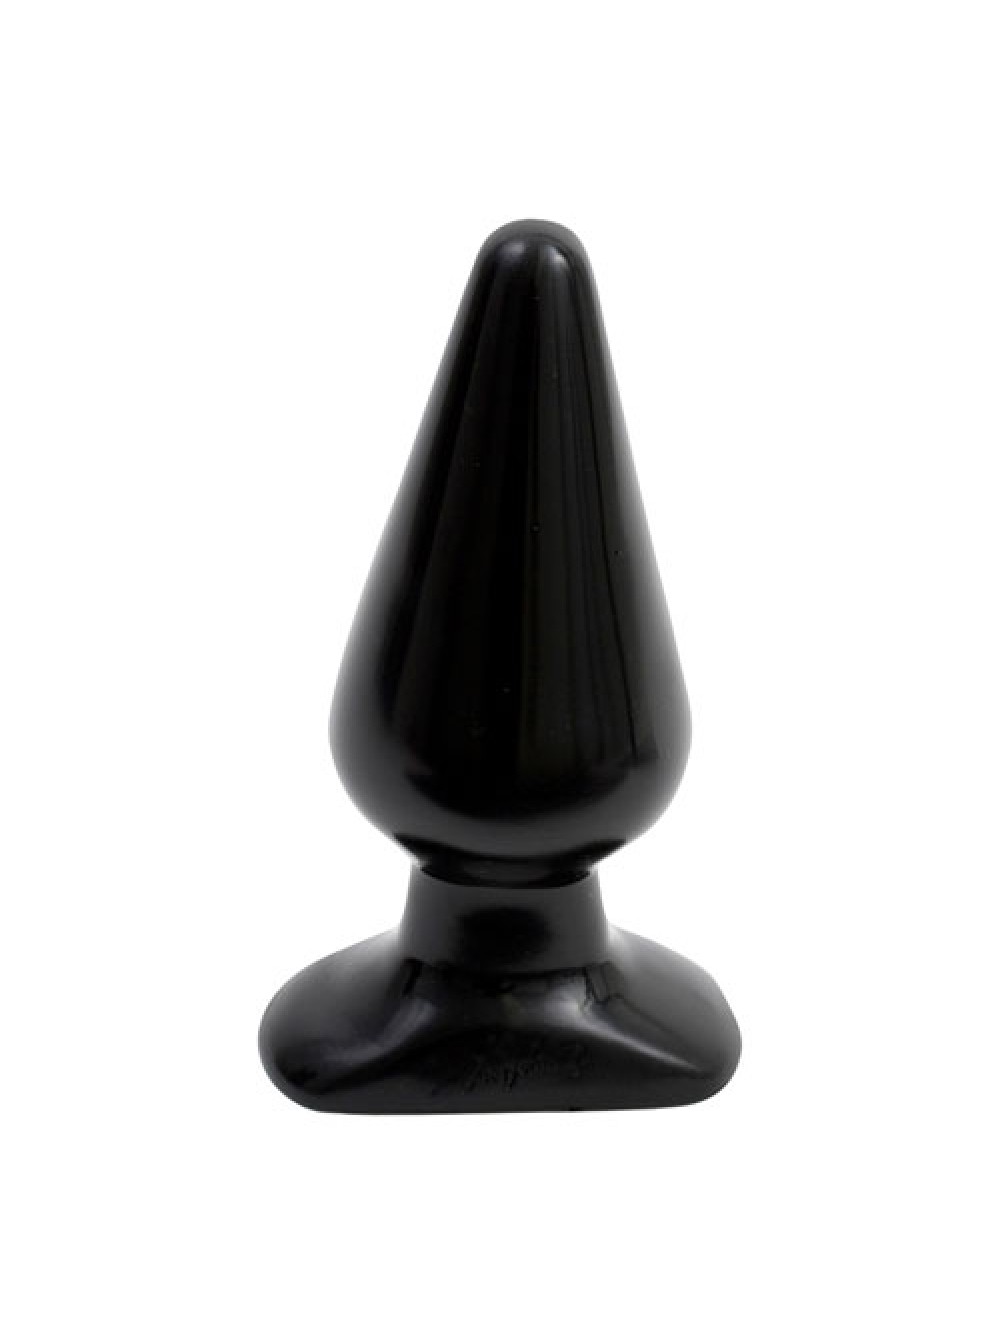 Butt Plug Black Large 5.5 Inches